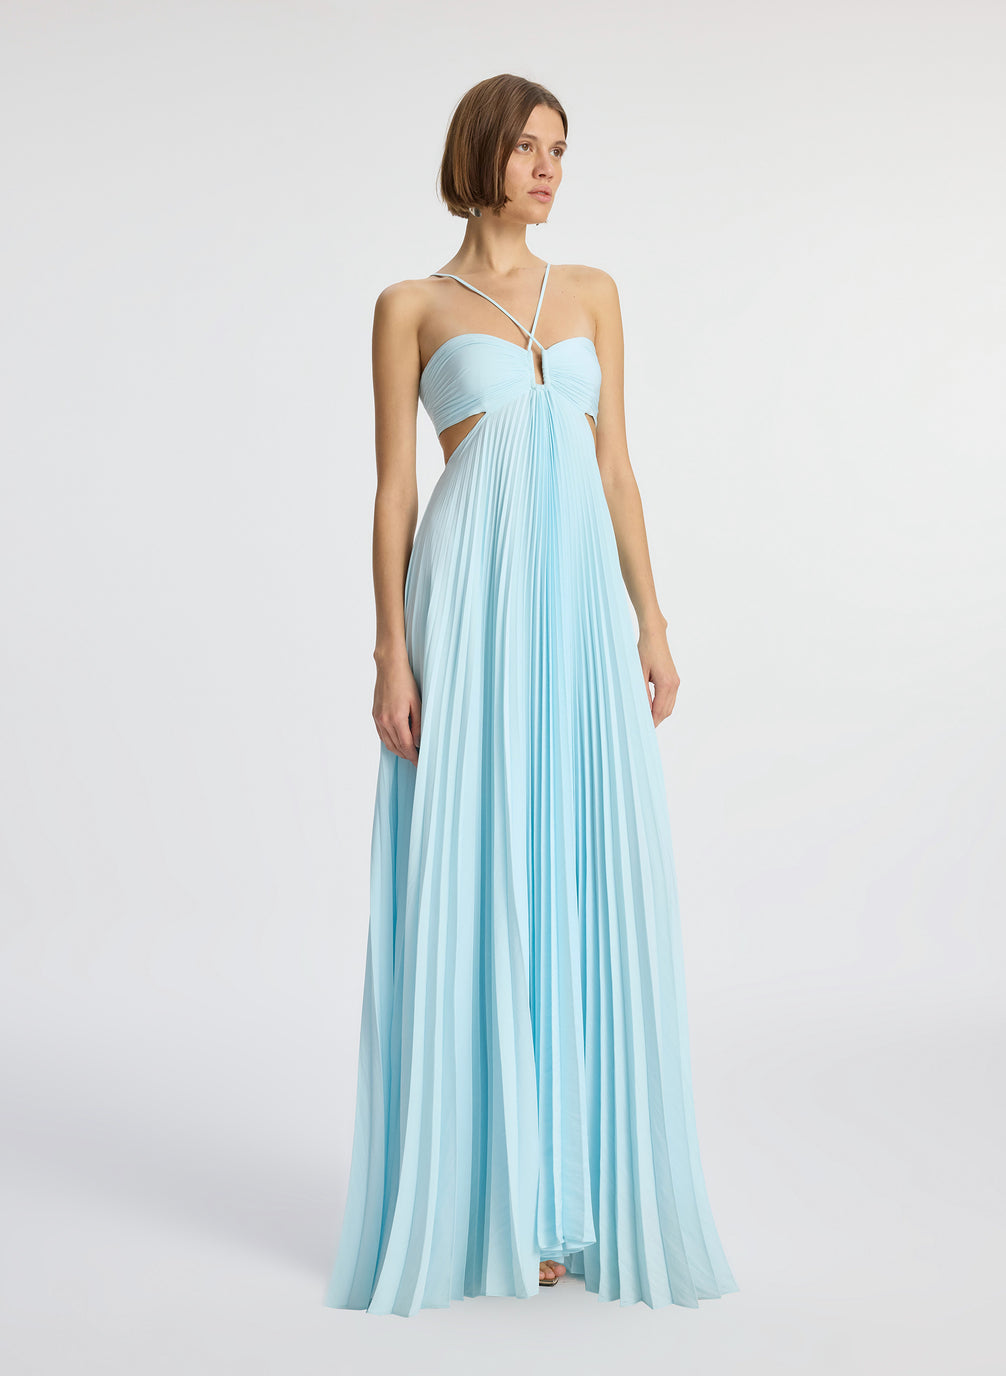 side view of woman wearing aqua satin pleated gown